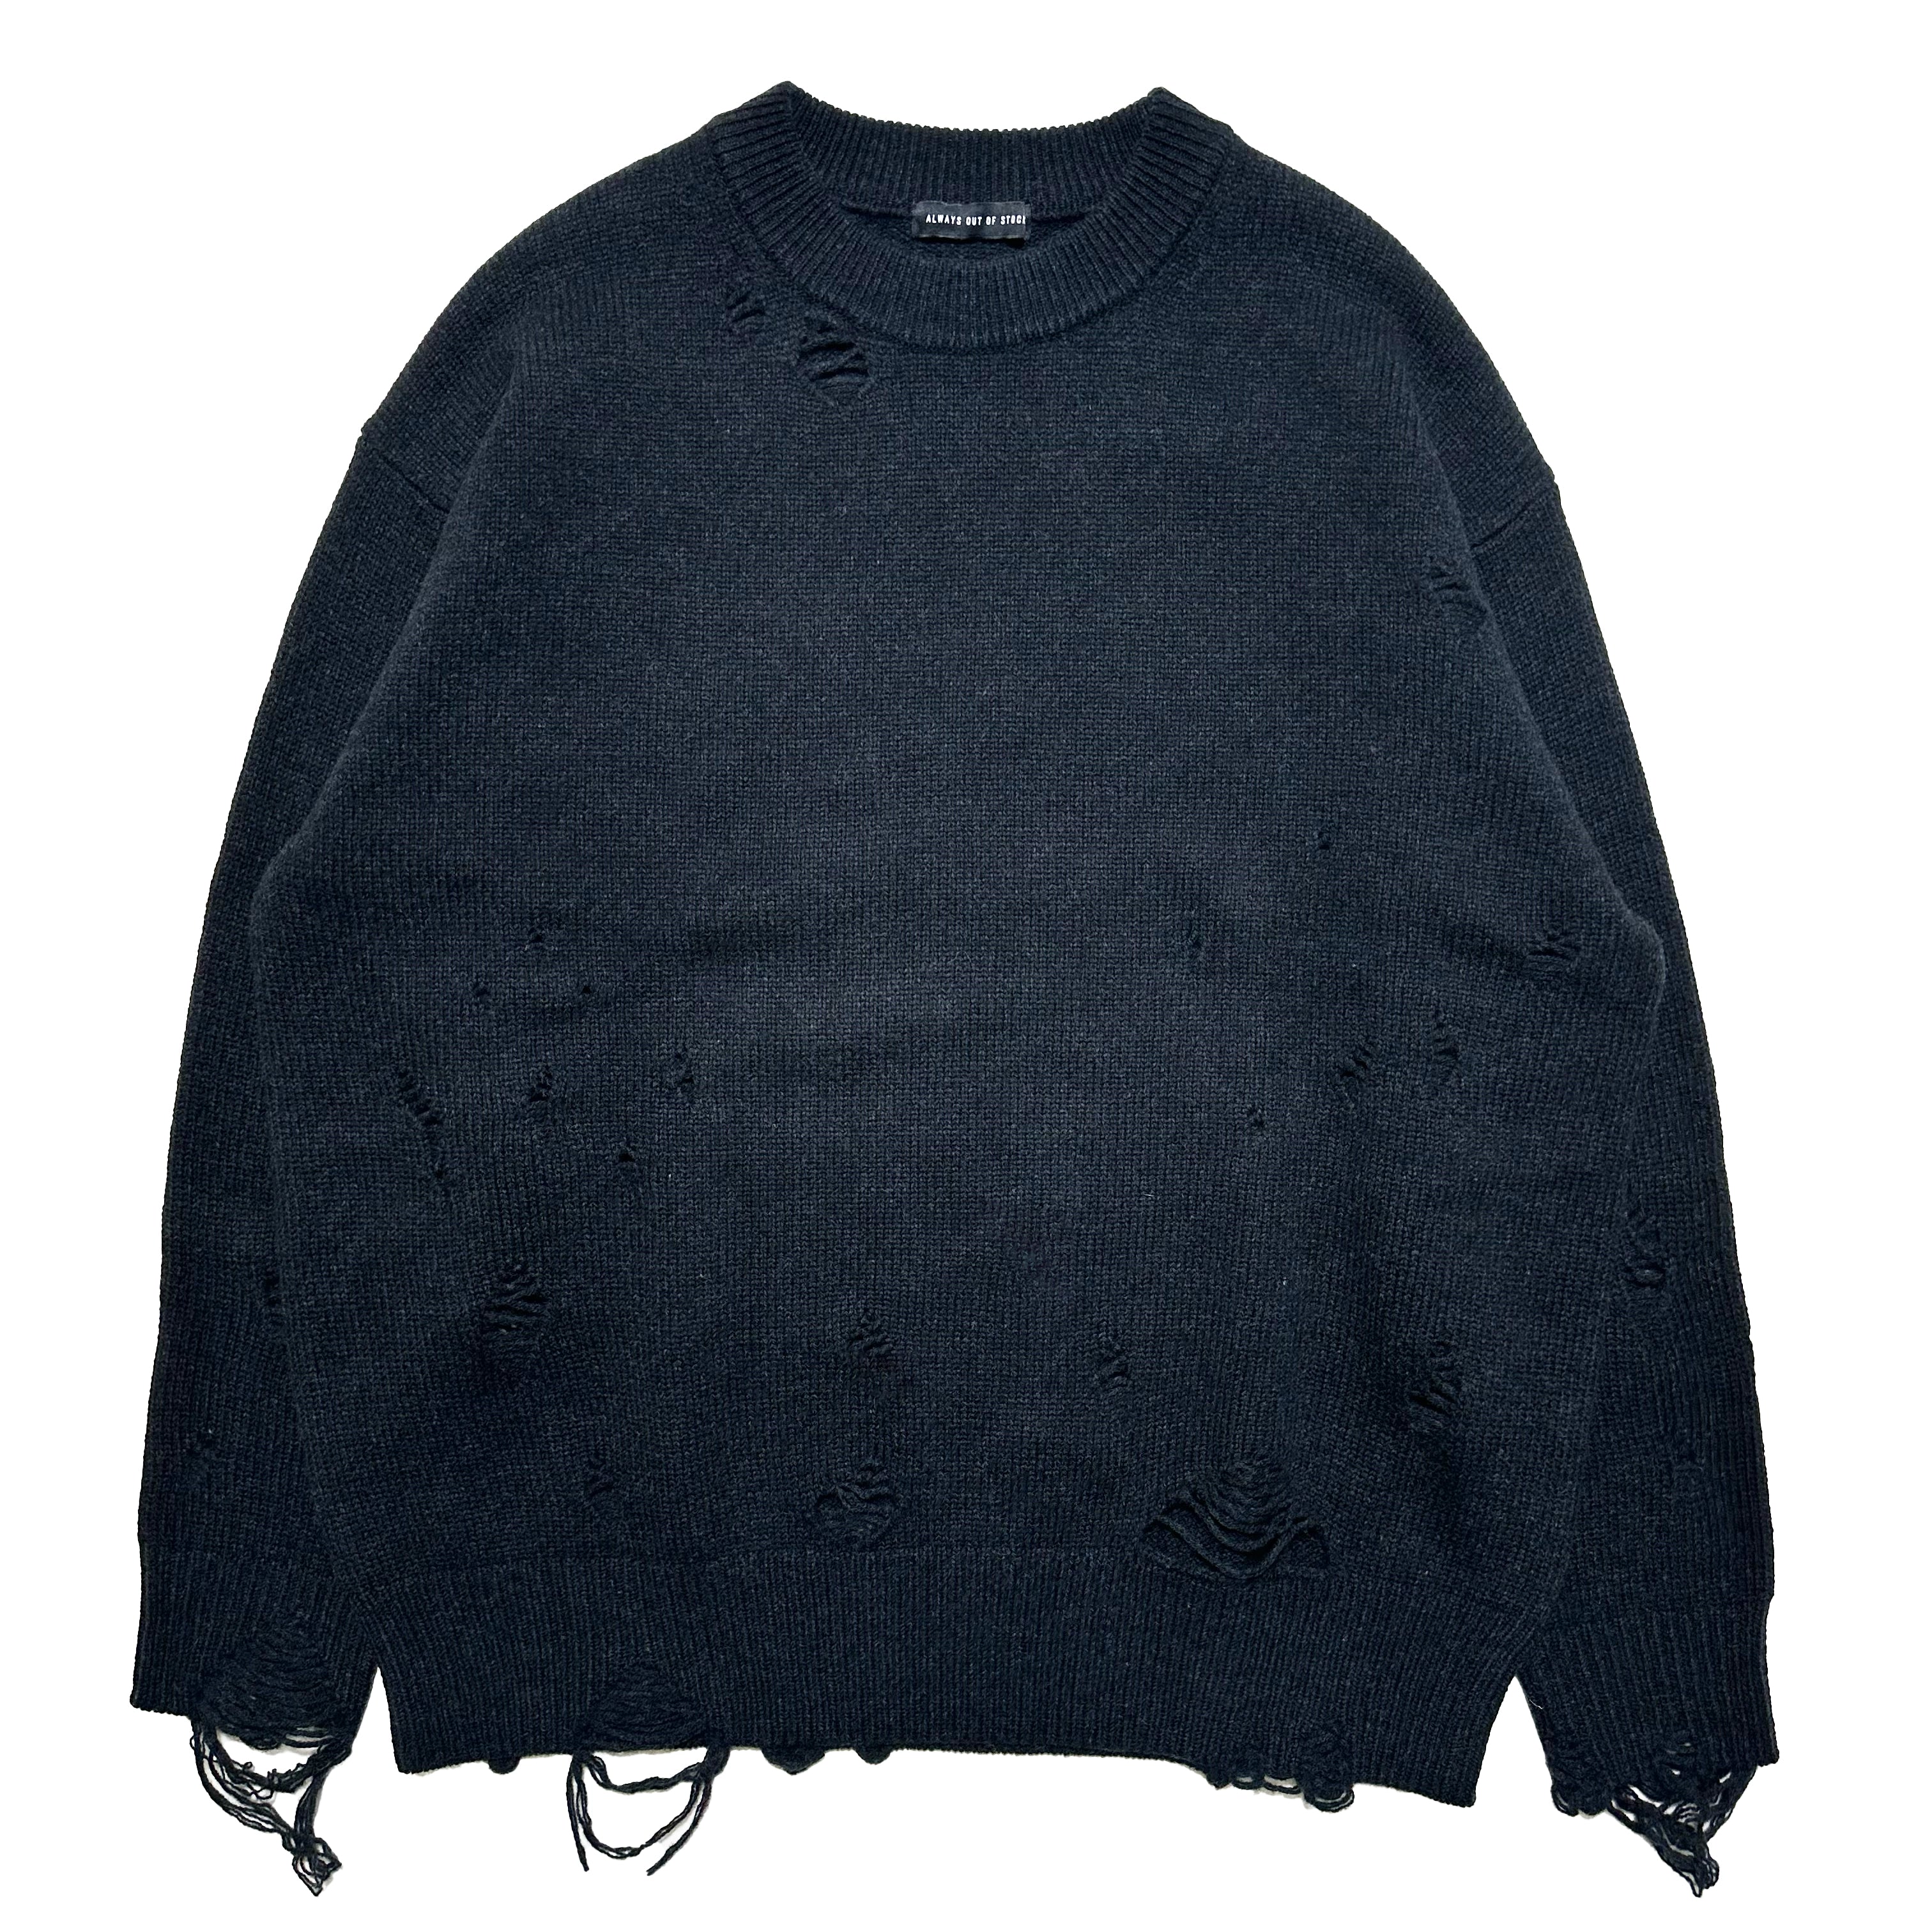 ALWAYS OUT OF STOCK/CRASH CREW NECK SWATER 